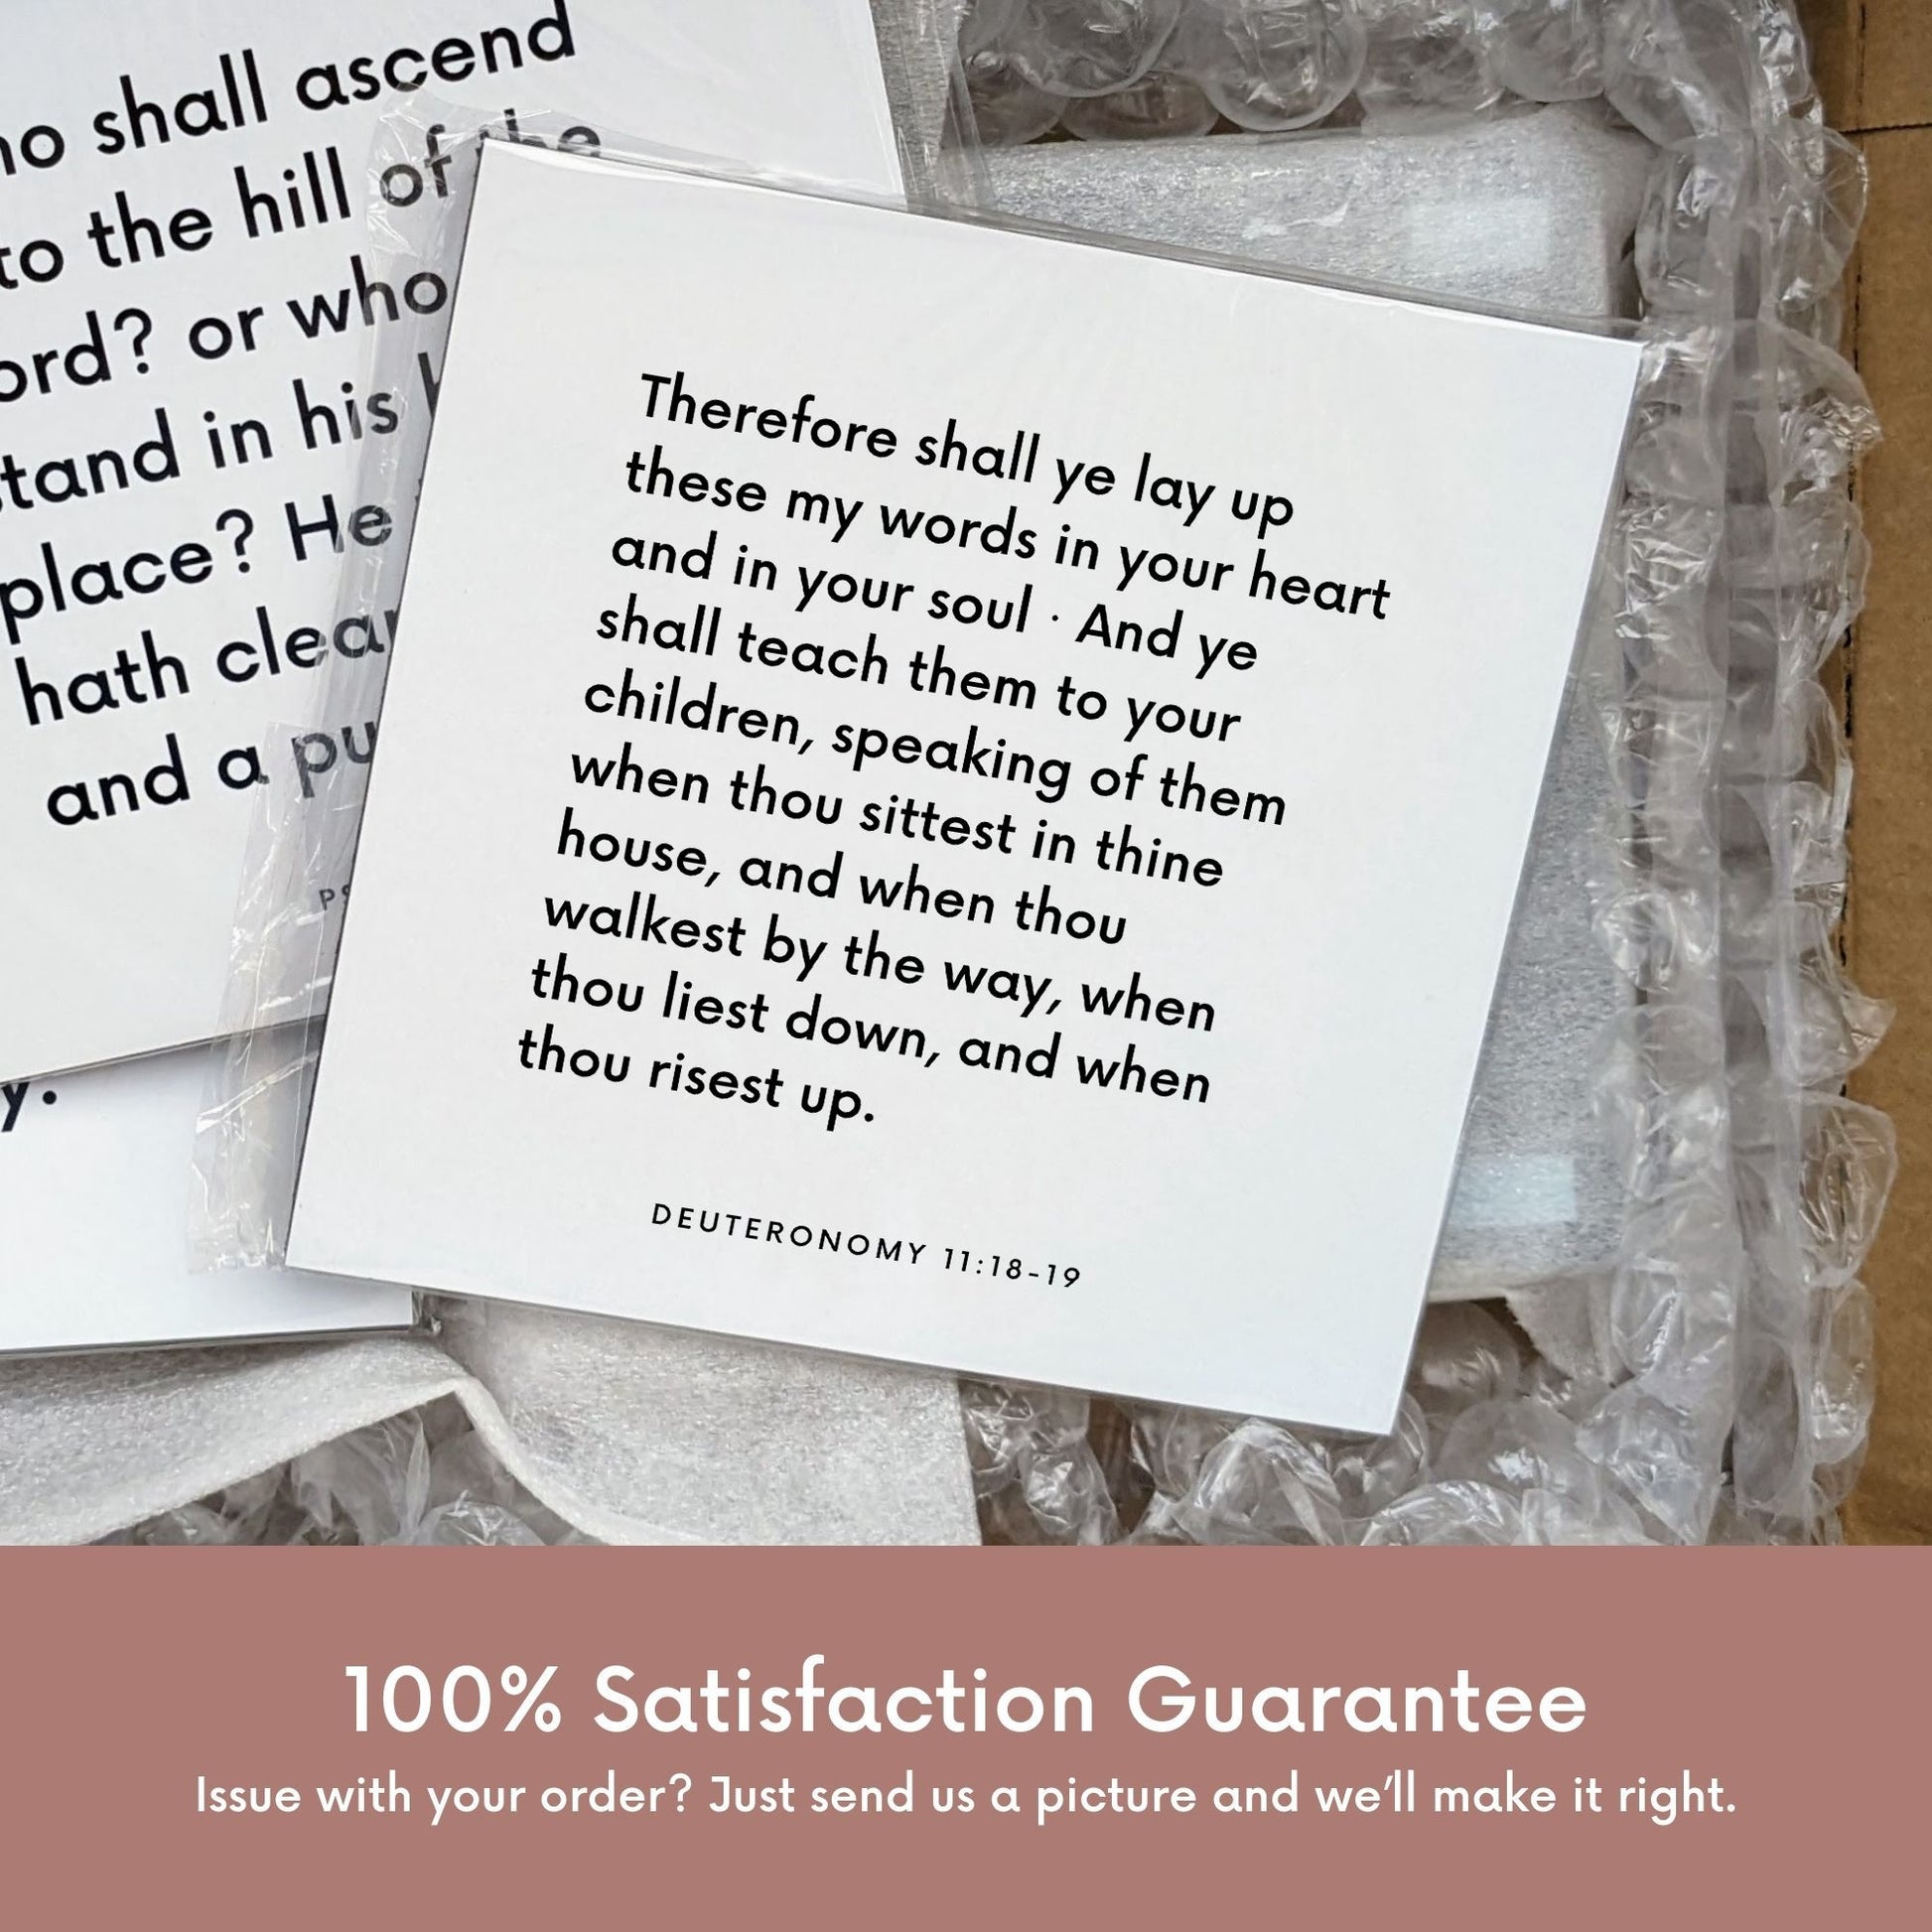 Shipping materials for scripture tile of Deuteronomy 11:18-19 - "Lay up these my words in your heart and in your soul"